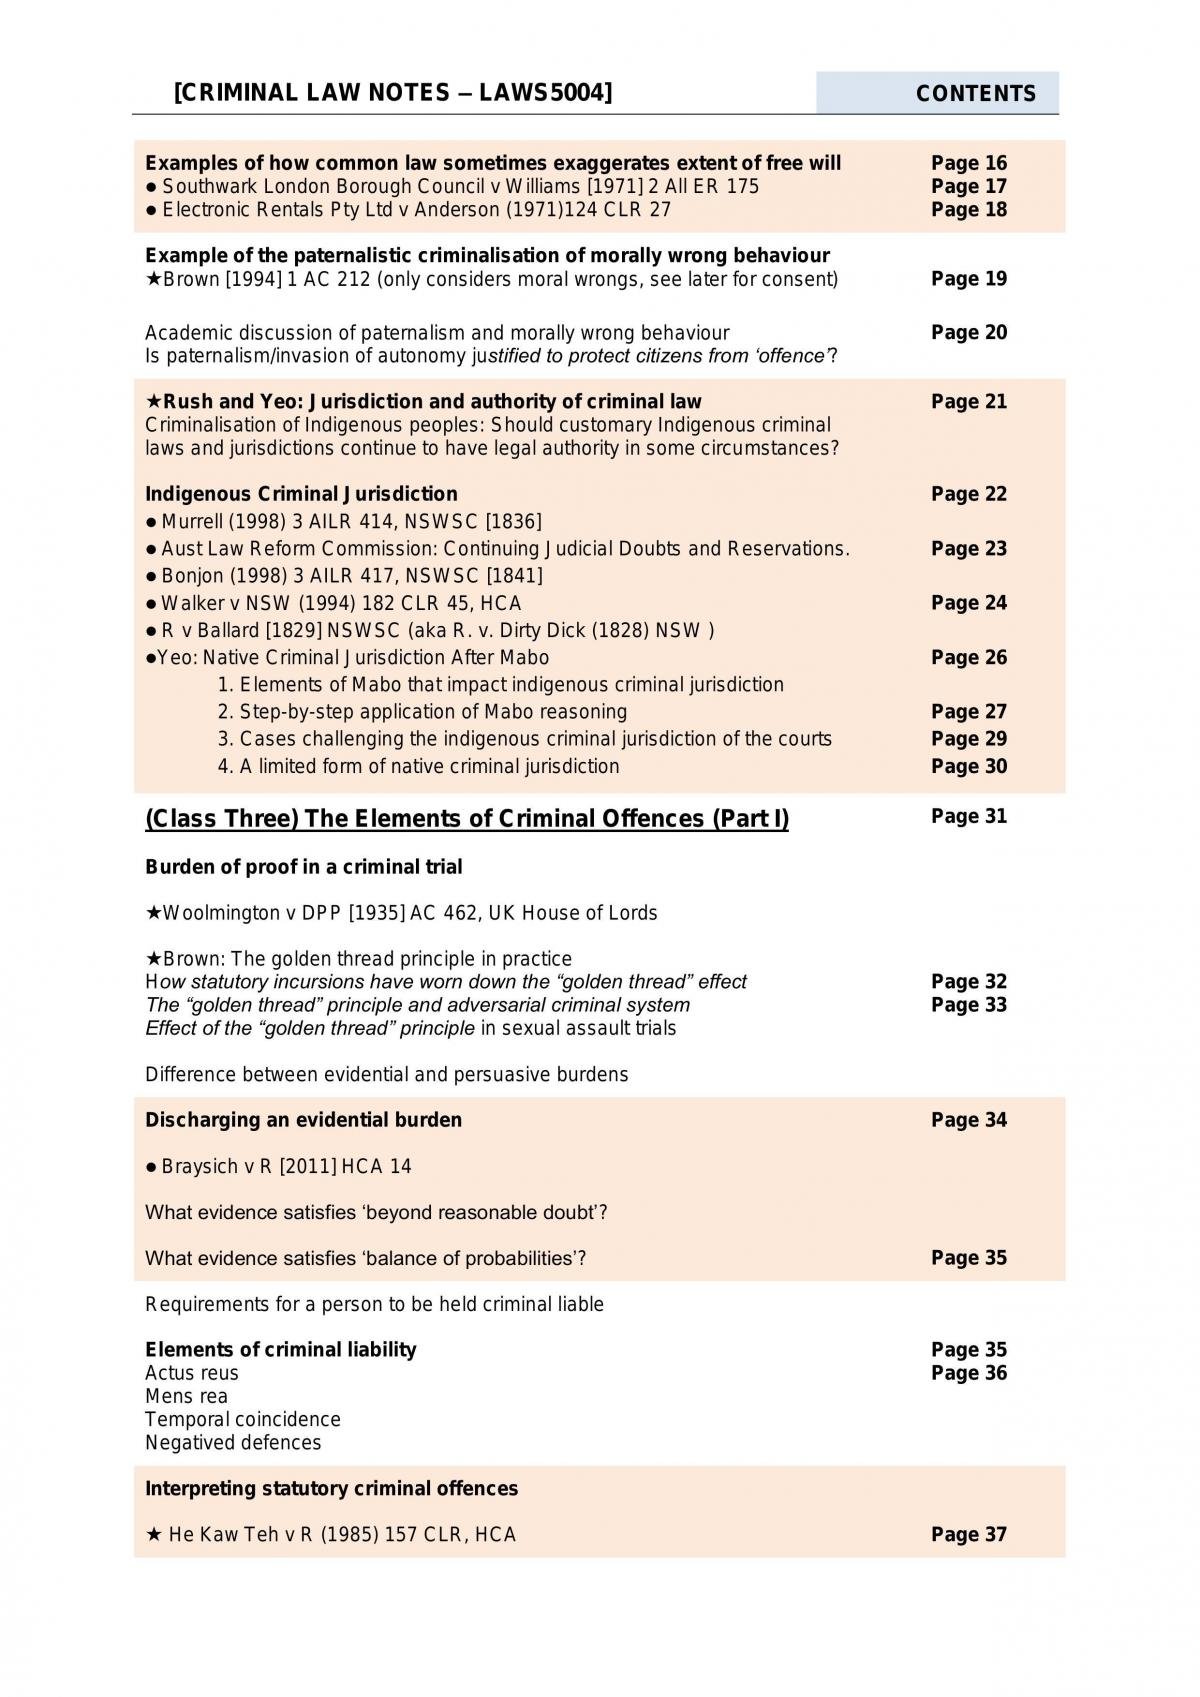 LAWS1016 Criminal Law Notes and Analysis for Final Exam - Page 2